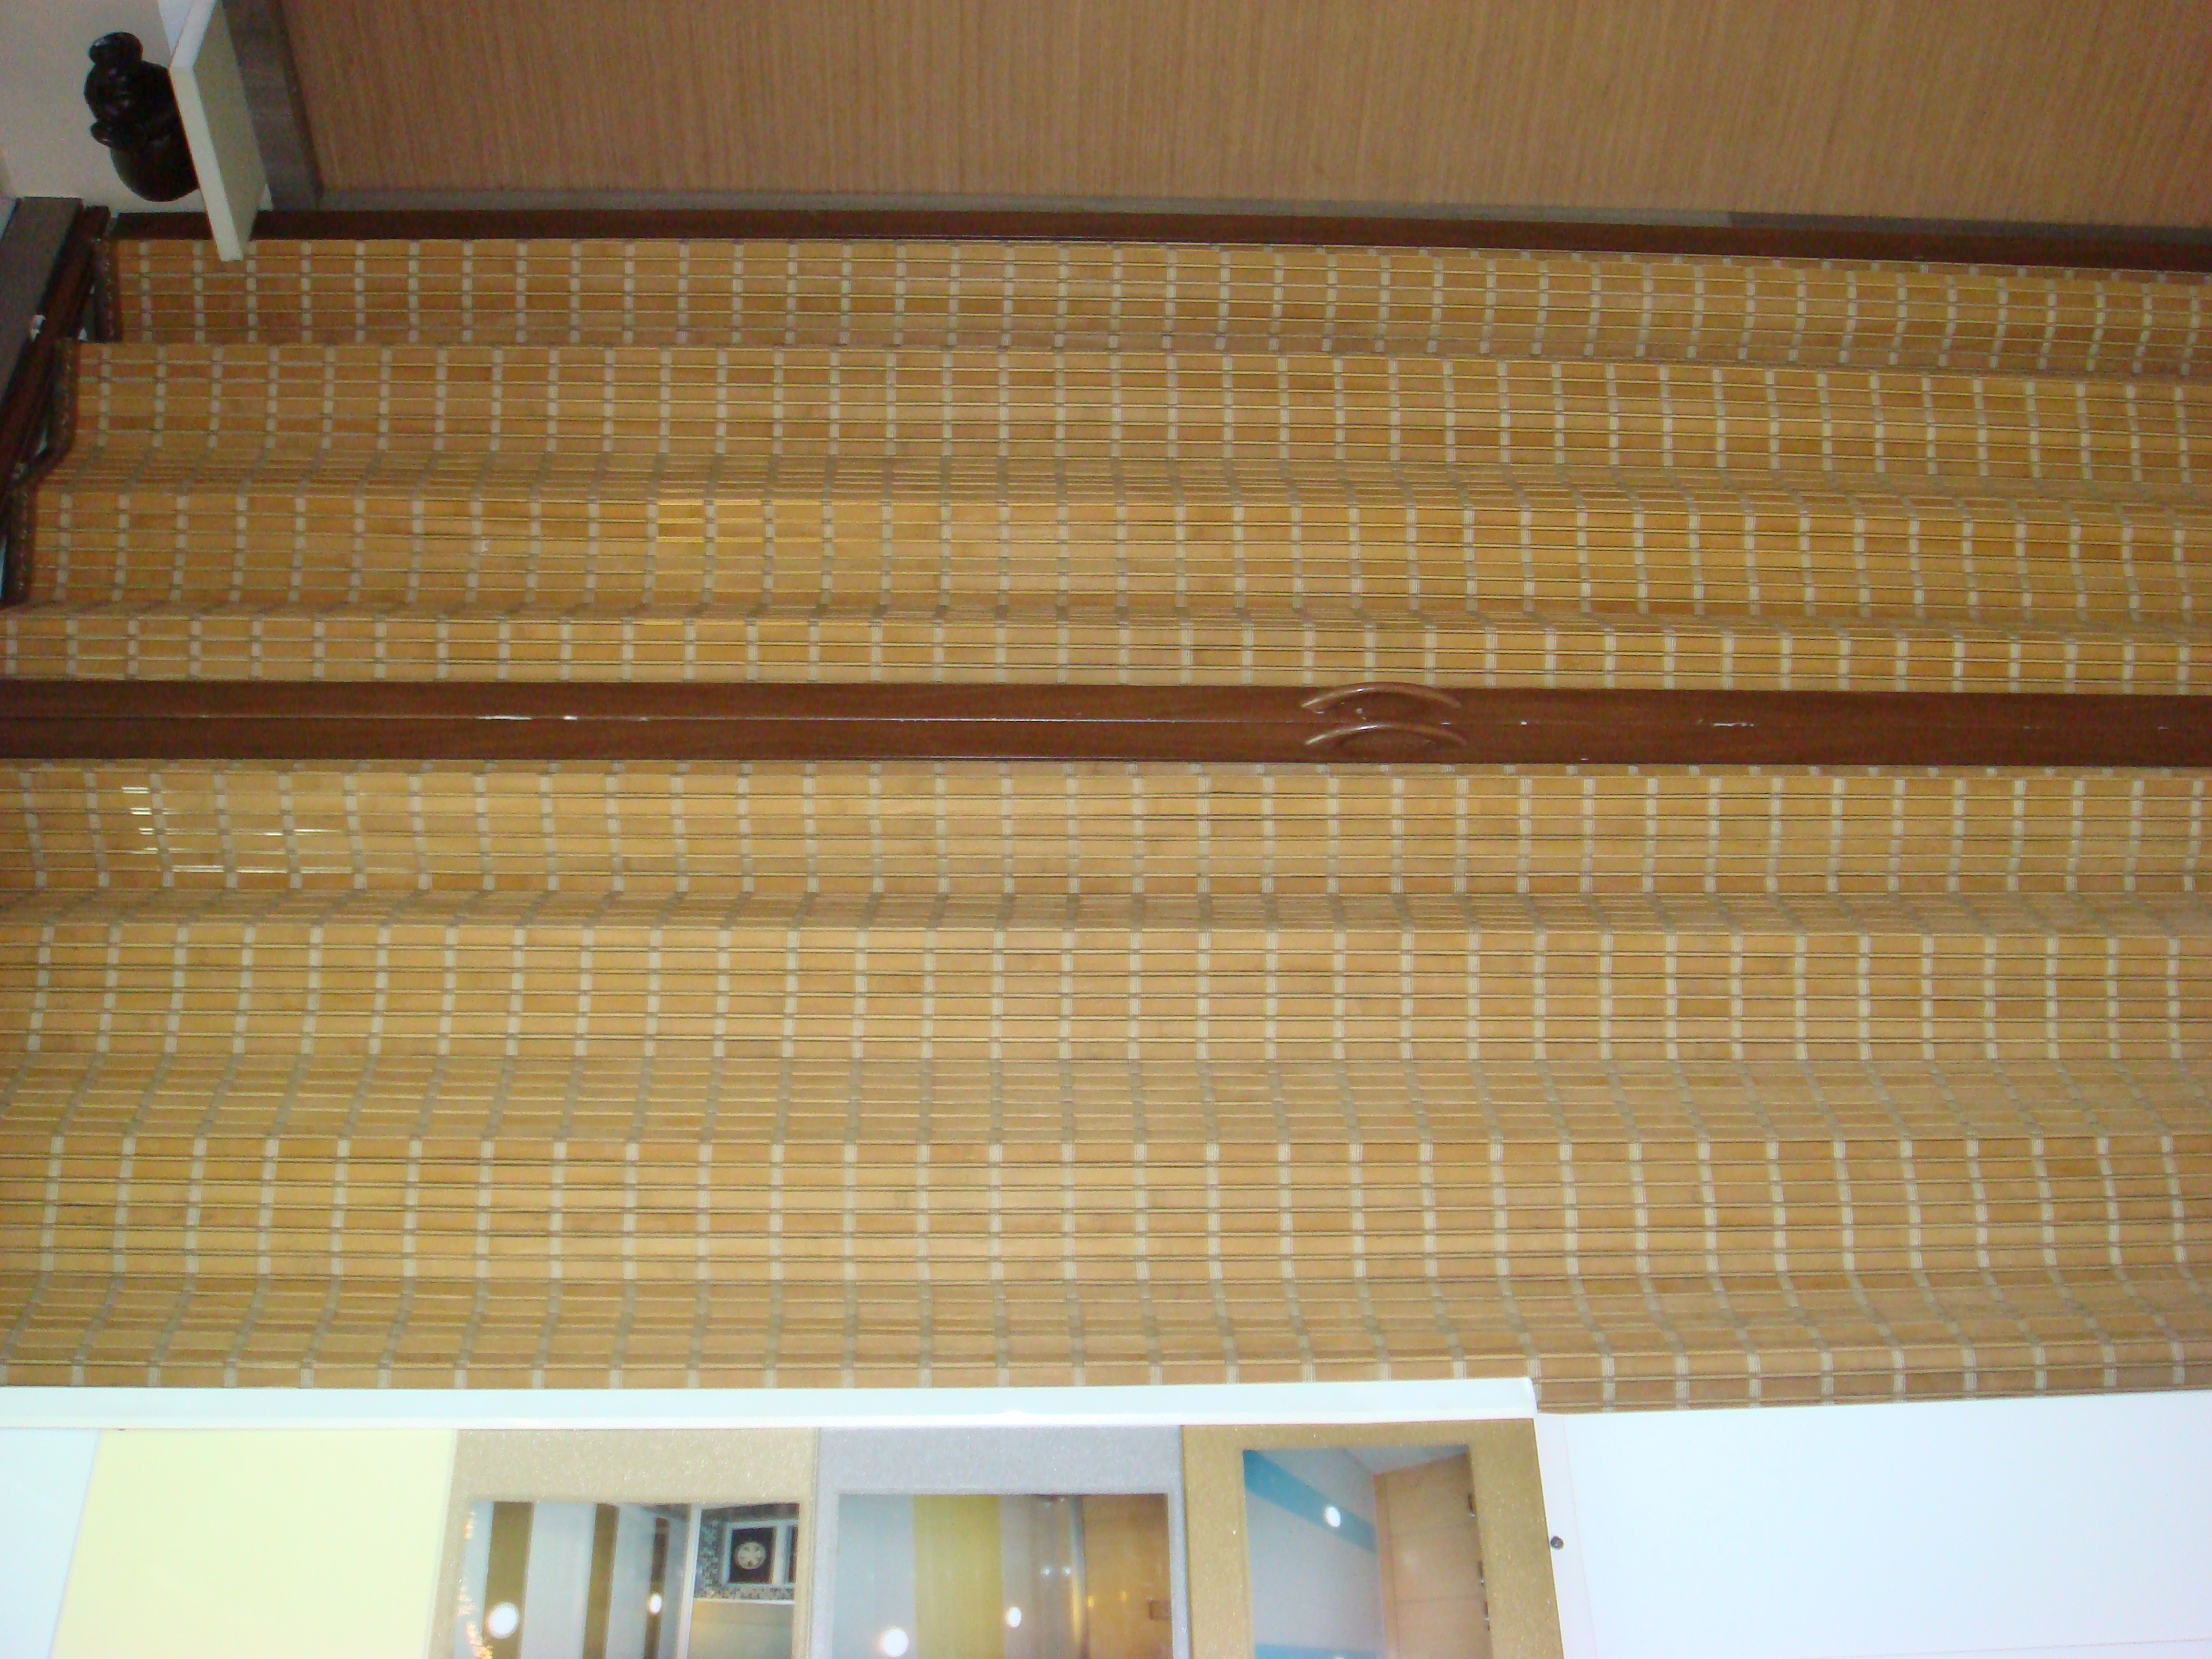 ECONOMY WOVEN WOOD SHADES - DISCOUNT FAUX  WOOD WINDOW BLINDS